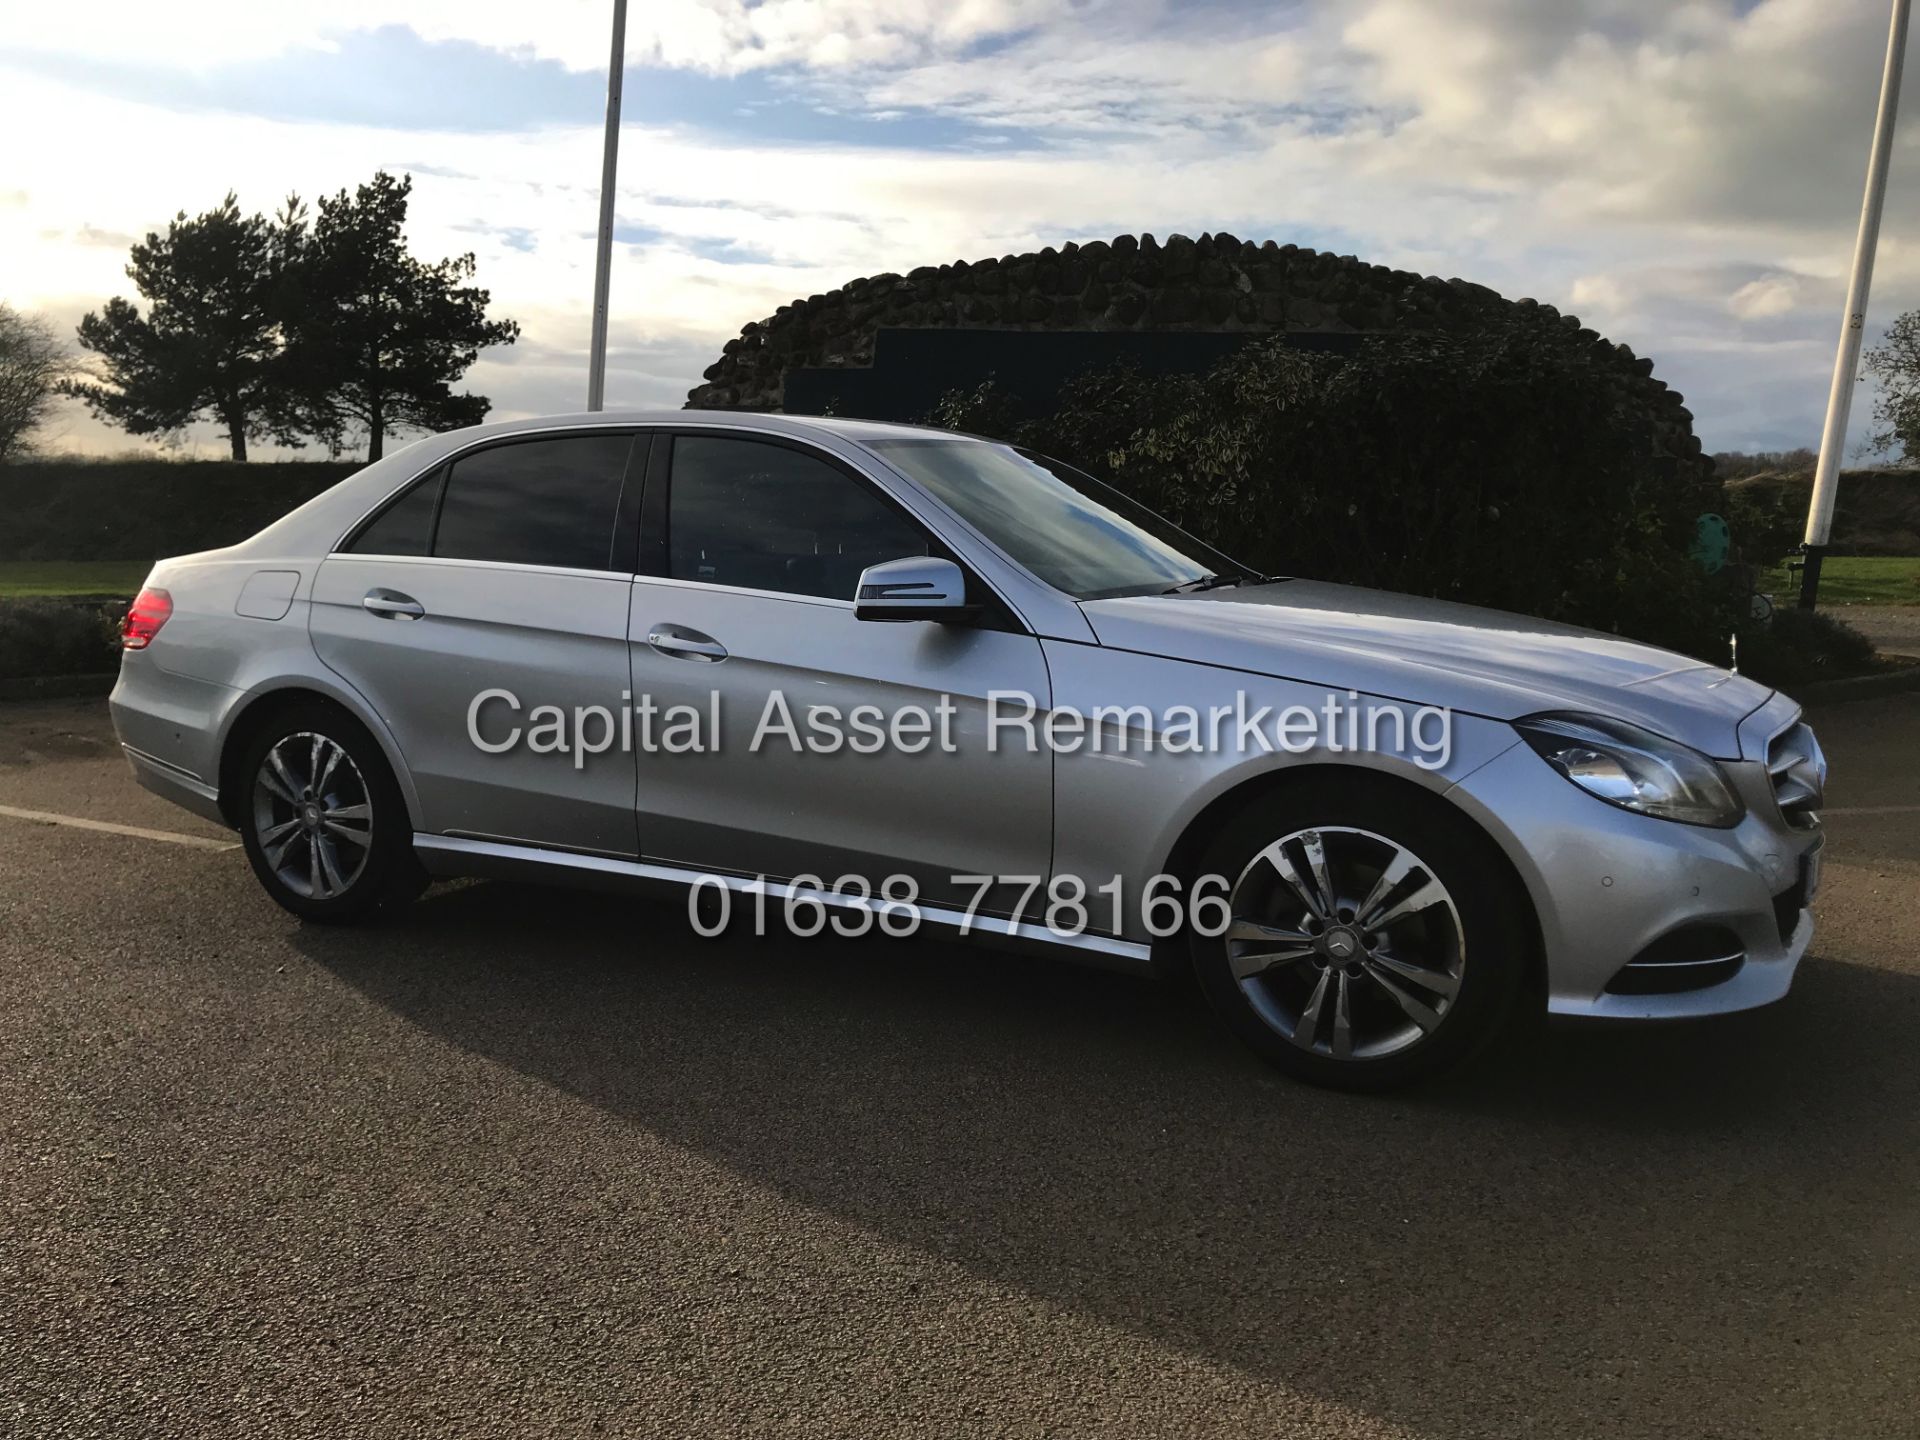 MERCEDES E220d "SPECIAL EQUIPMENT" 7G TRONIC AUTO (2015 MODEL) 1 OWNER - SAT NAV - LEATHER - Image 2 of 26